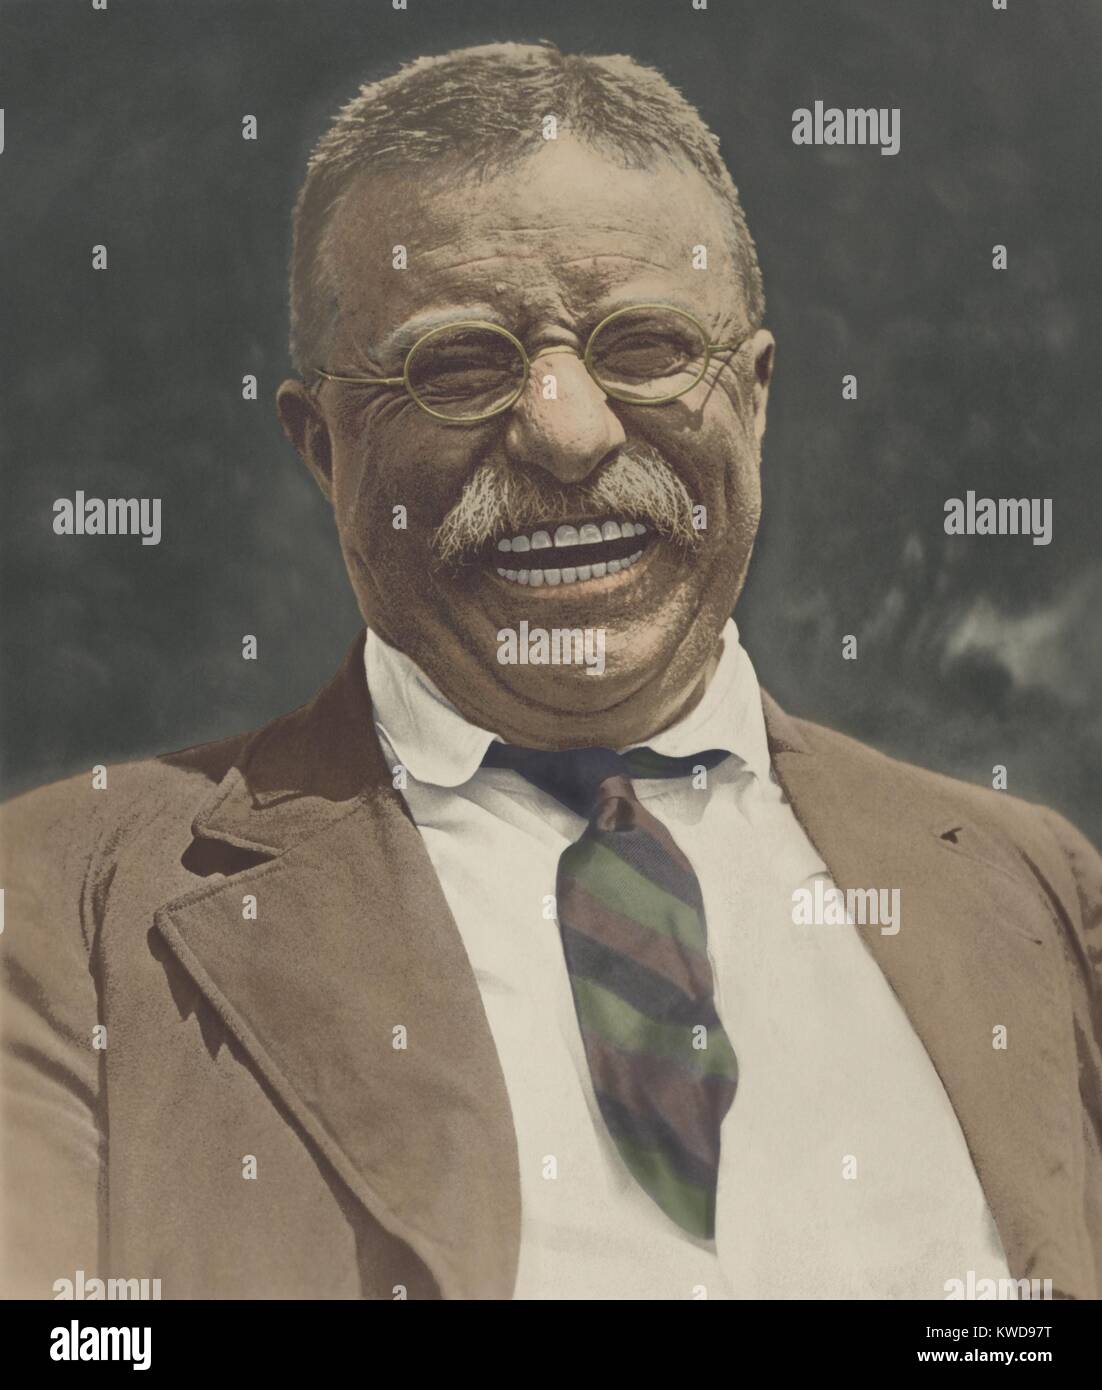 Theodore Roosevelt laughing, c. 1910-1912. Roosevelt returned from his post-presidential African safari to adoring crowds on June 18, 1910. He soon re-entered the public arena with a speaking tour in the Midwest. By early 1911 he began to challenge Presid (BSLOC 2016 9 12)DUPLICATE REMOVED: SHOULD HAVE BEEN '7 Continents History', AS PER Barbara Schultz - DD Stock Photo